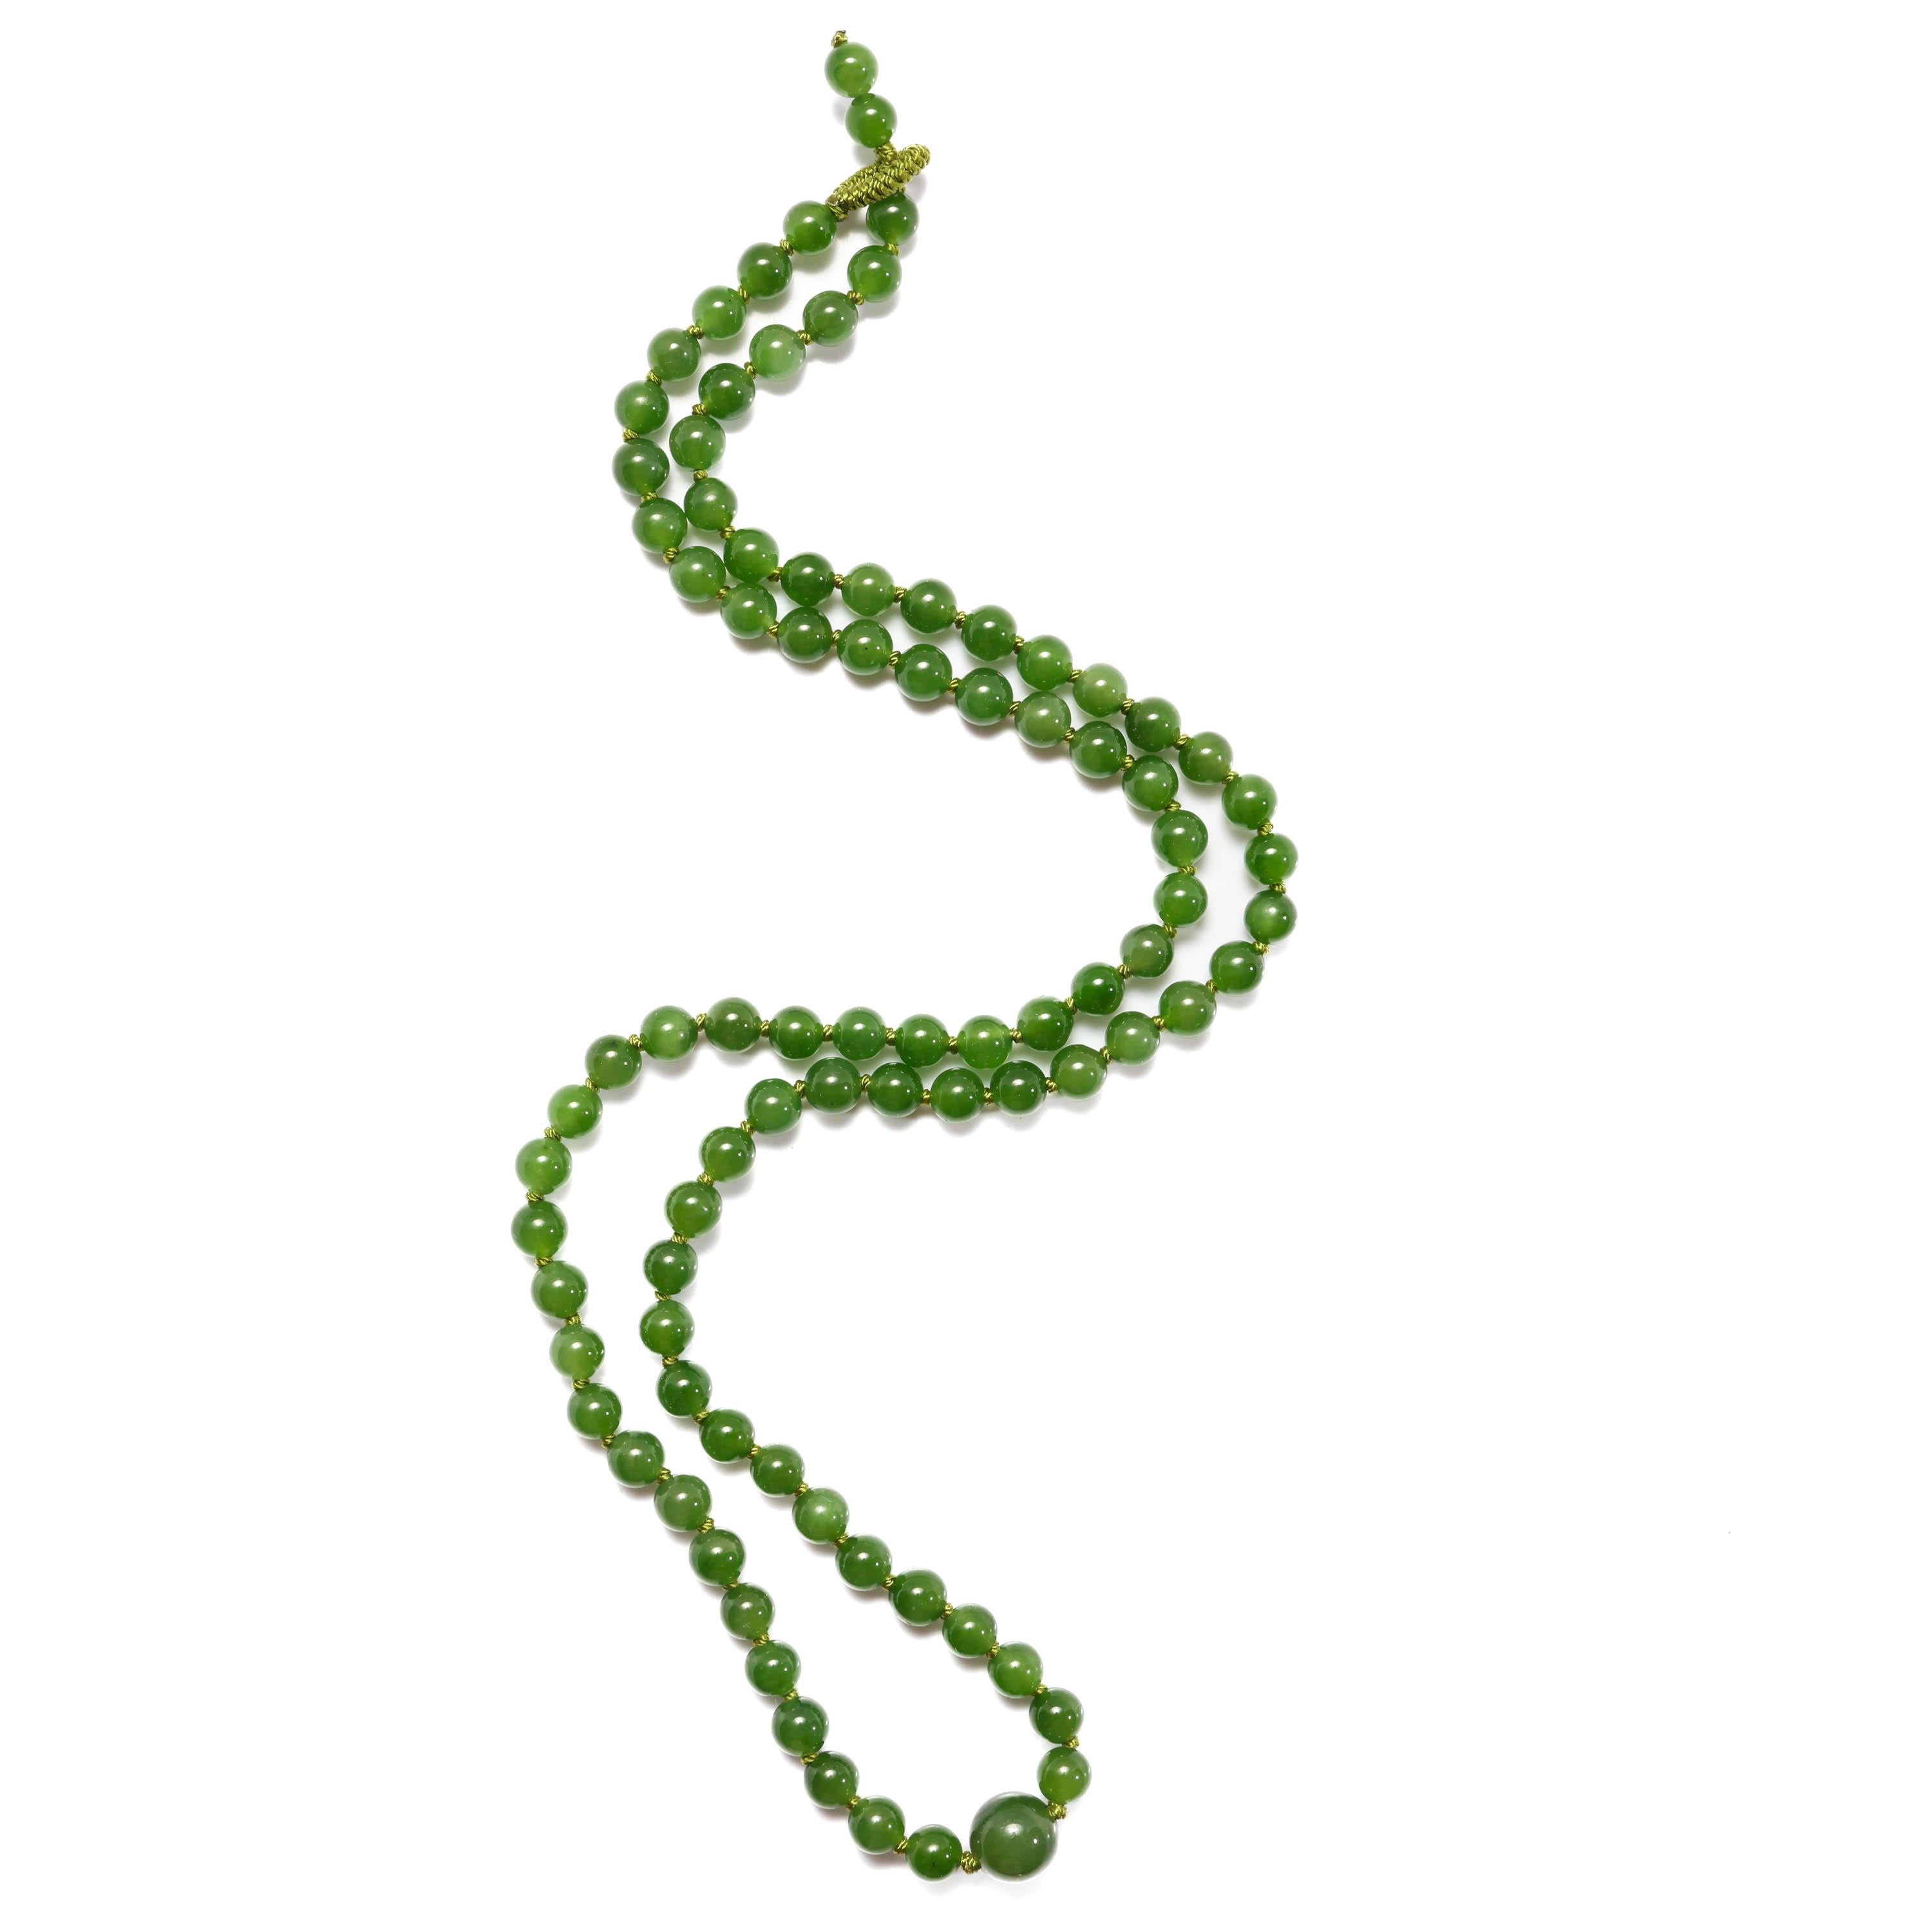 This is a brand new, handmade necklace created from very fine, highly translucent nephrite jade beads. Featuring a unique 